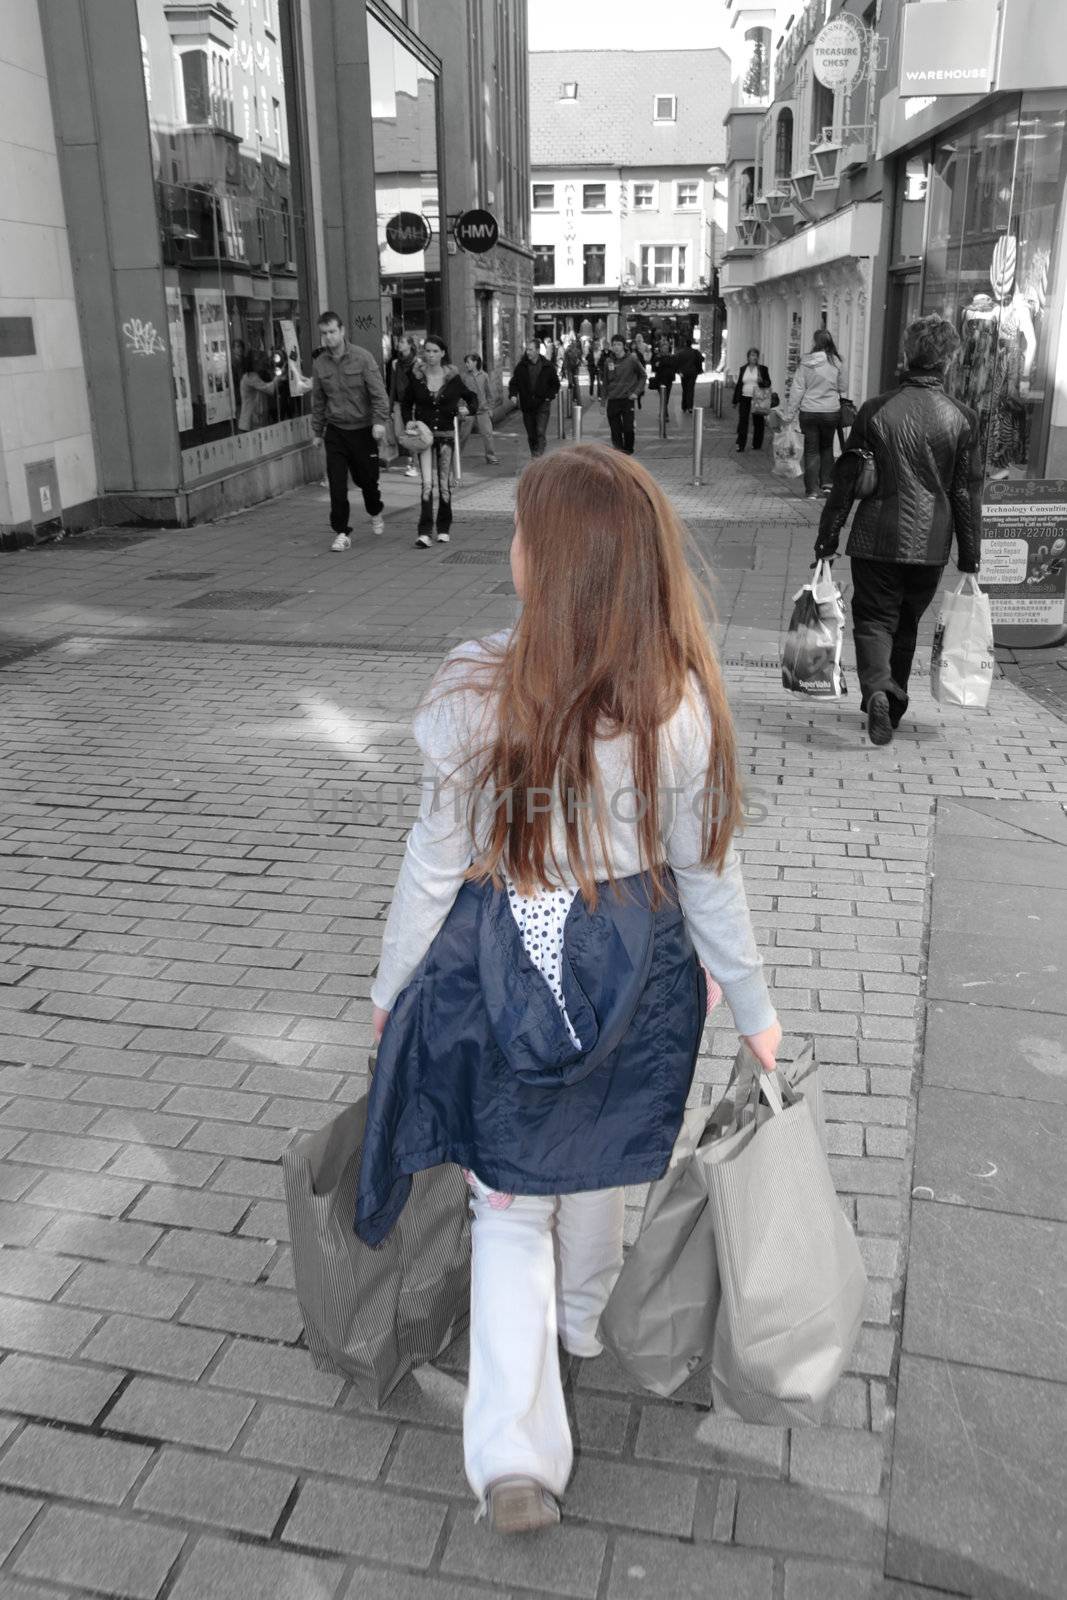 a young girl with shopping bags on a high street